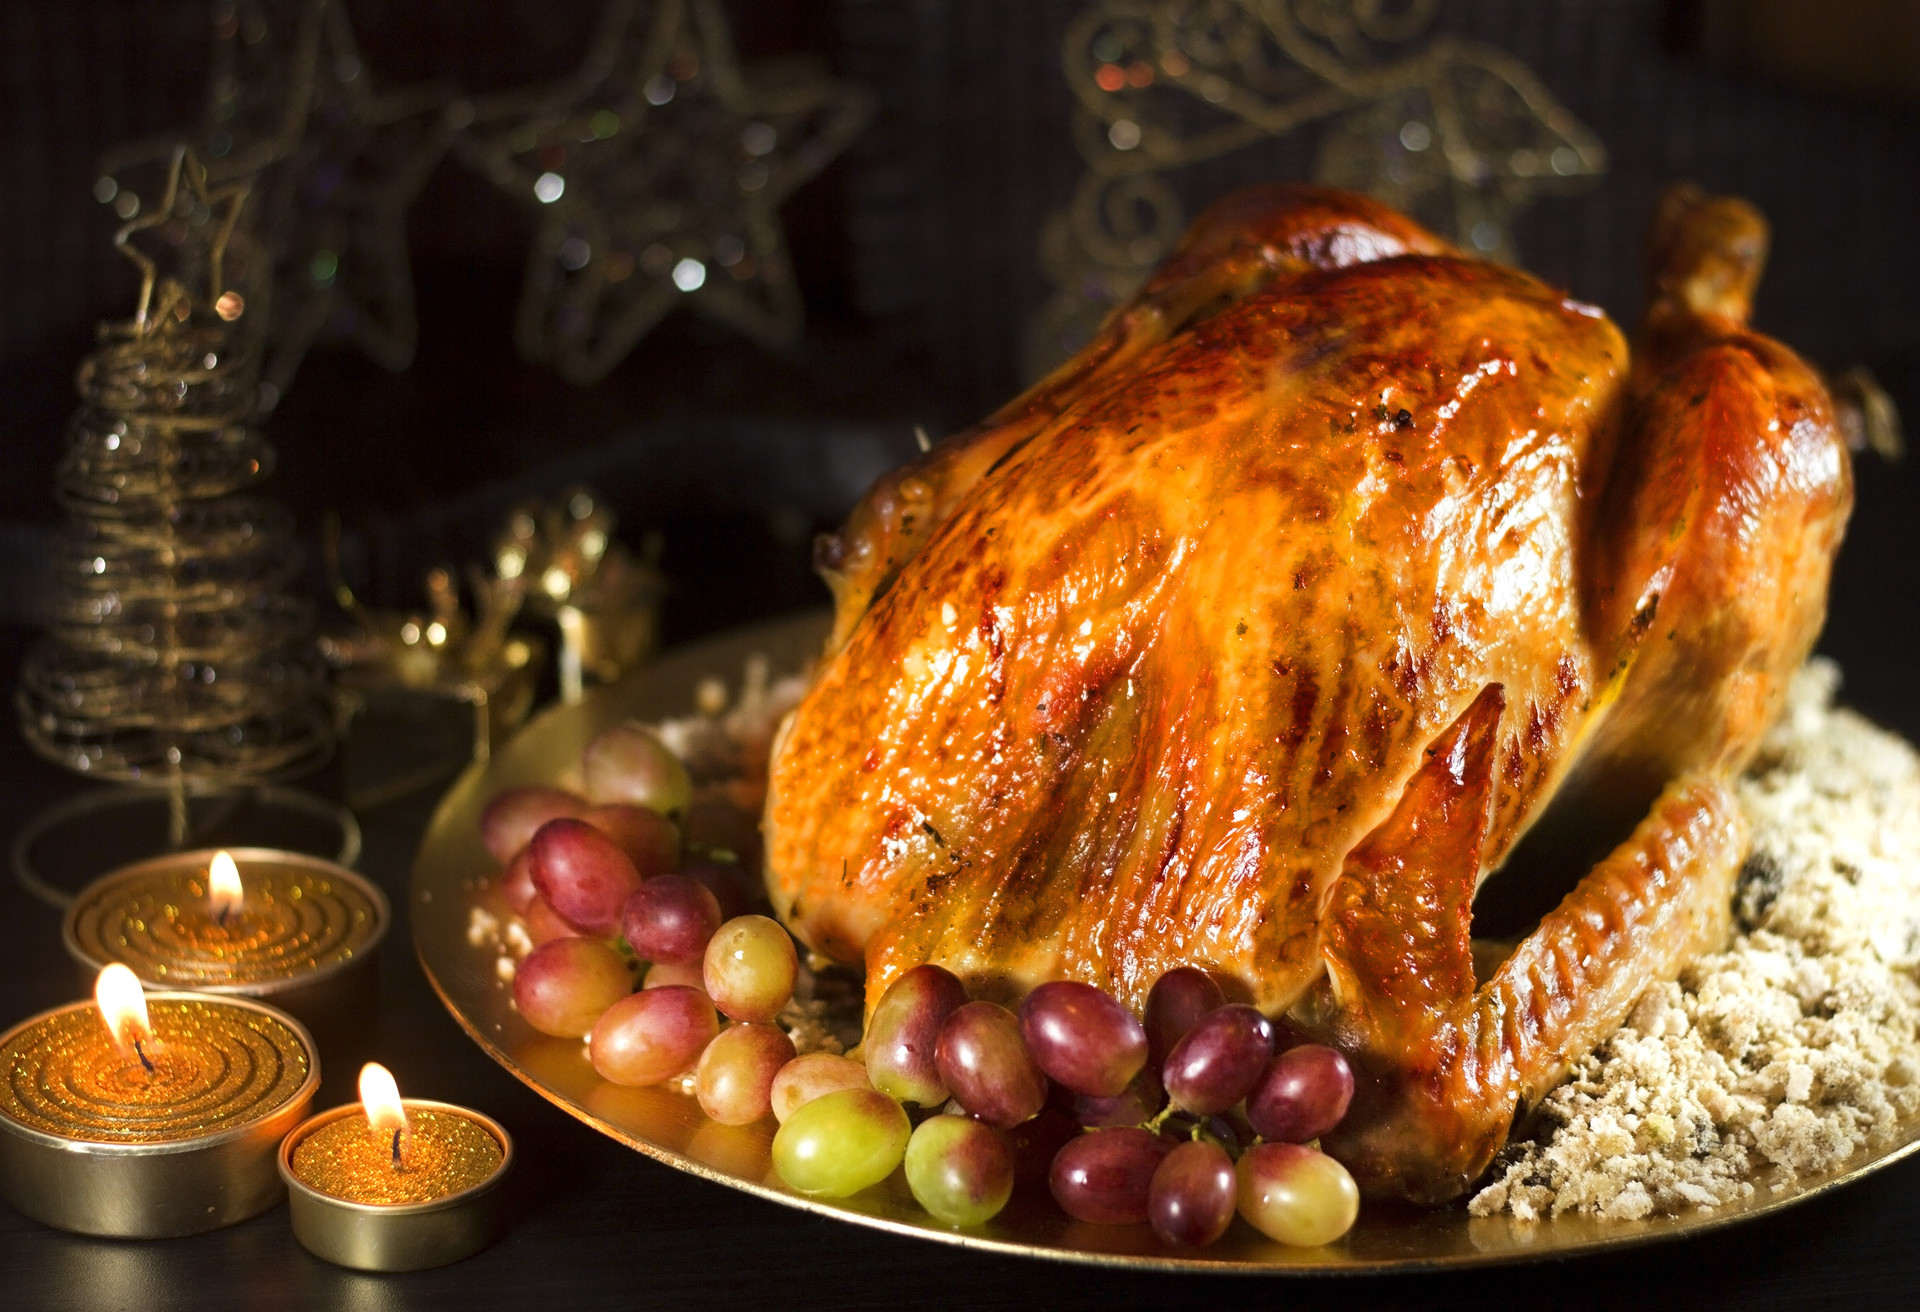 Roasted turkey with grapes and brazilian food farofa on dark background with candles.; Shutterstock ID 343312007; Purpose: Virtual Christmas Guides; Brand (KAYAK, Momondo, Any): Kayak; Client/Licensee: KAYAK